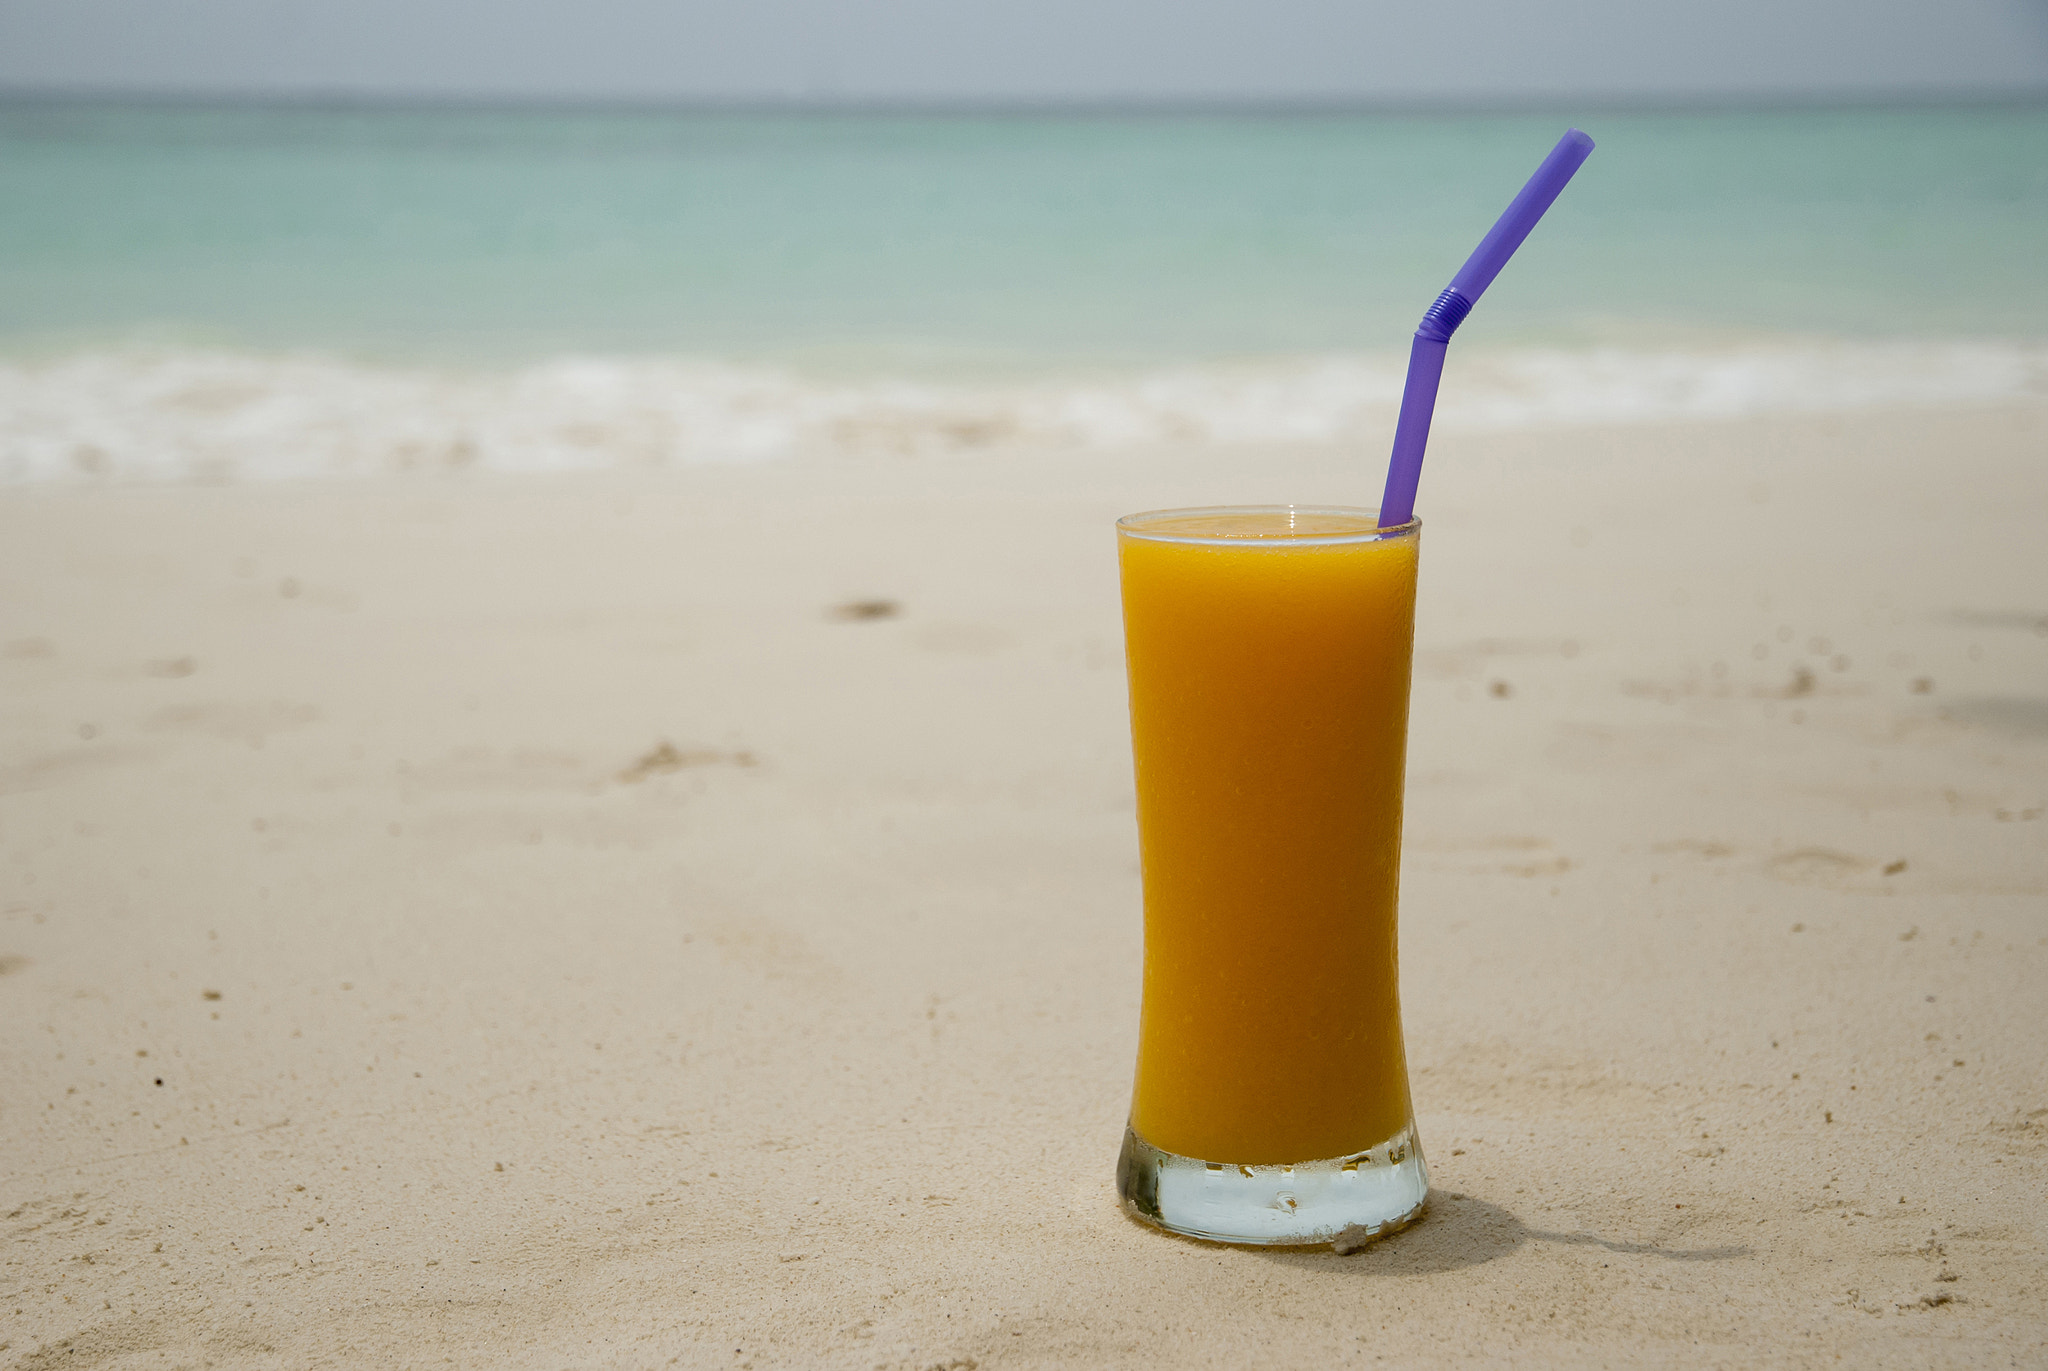 Nikon D80 + Nikon AF-S DX Nikkor 16-85mm F3.5-5.6G ED VR sample photo. Glass with juice on the tropical beach with a sea and sand as a photography